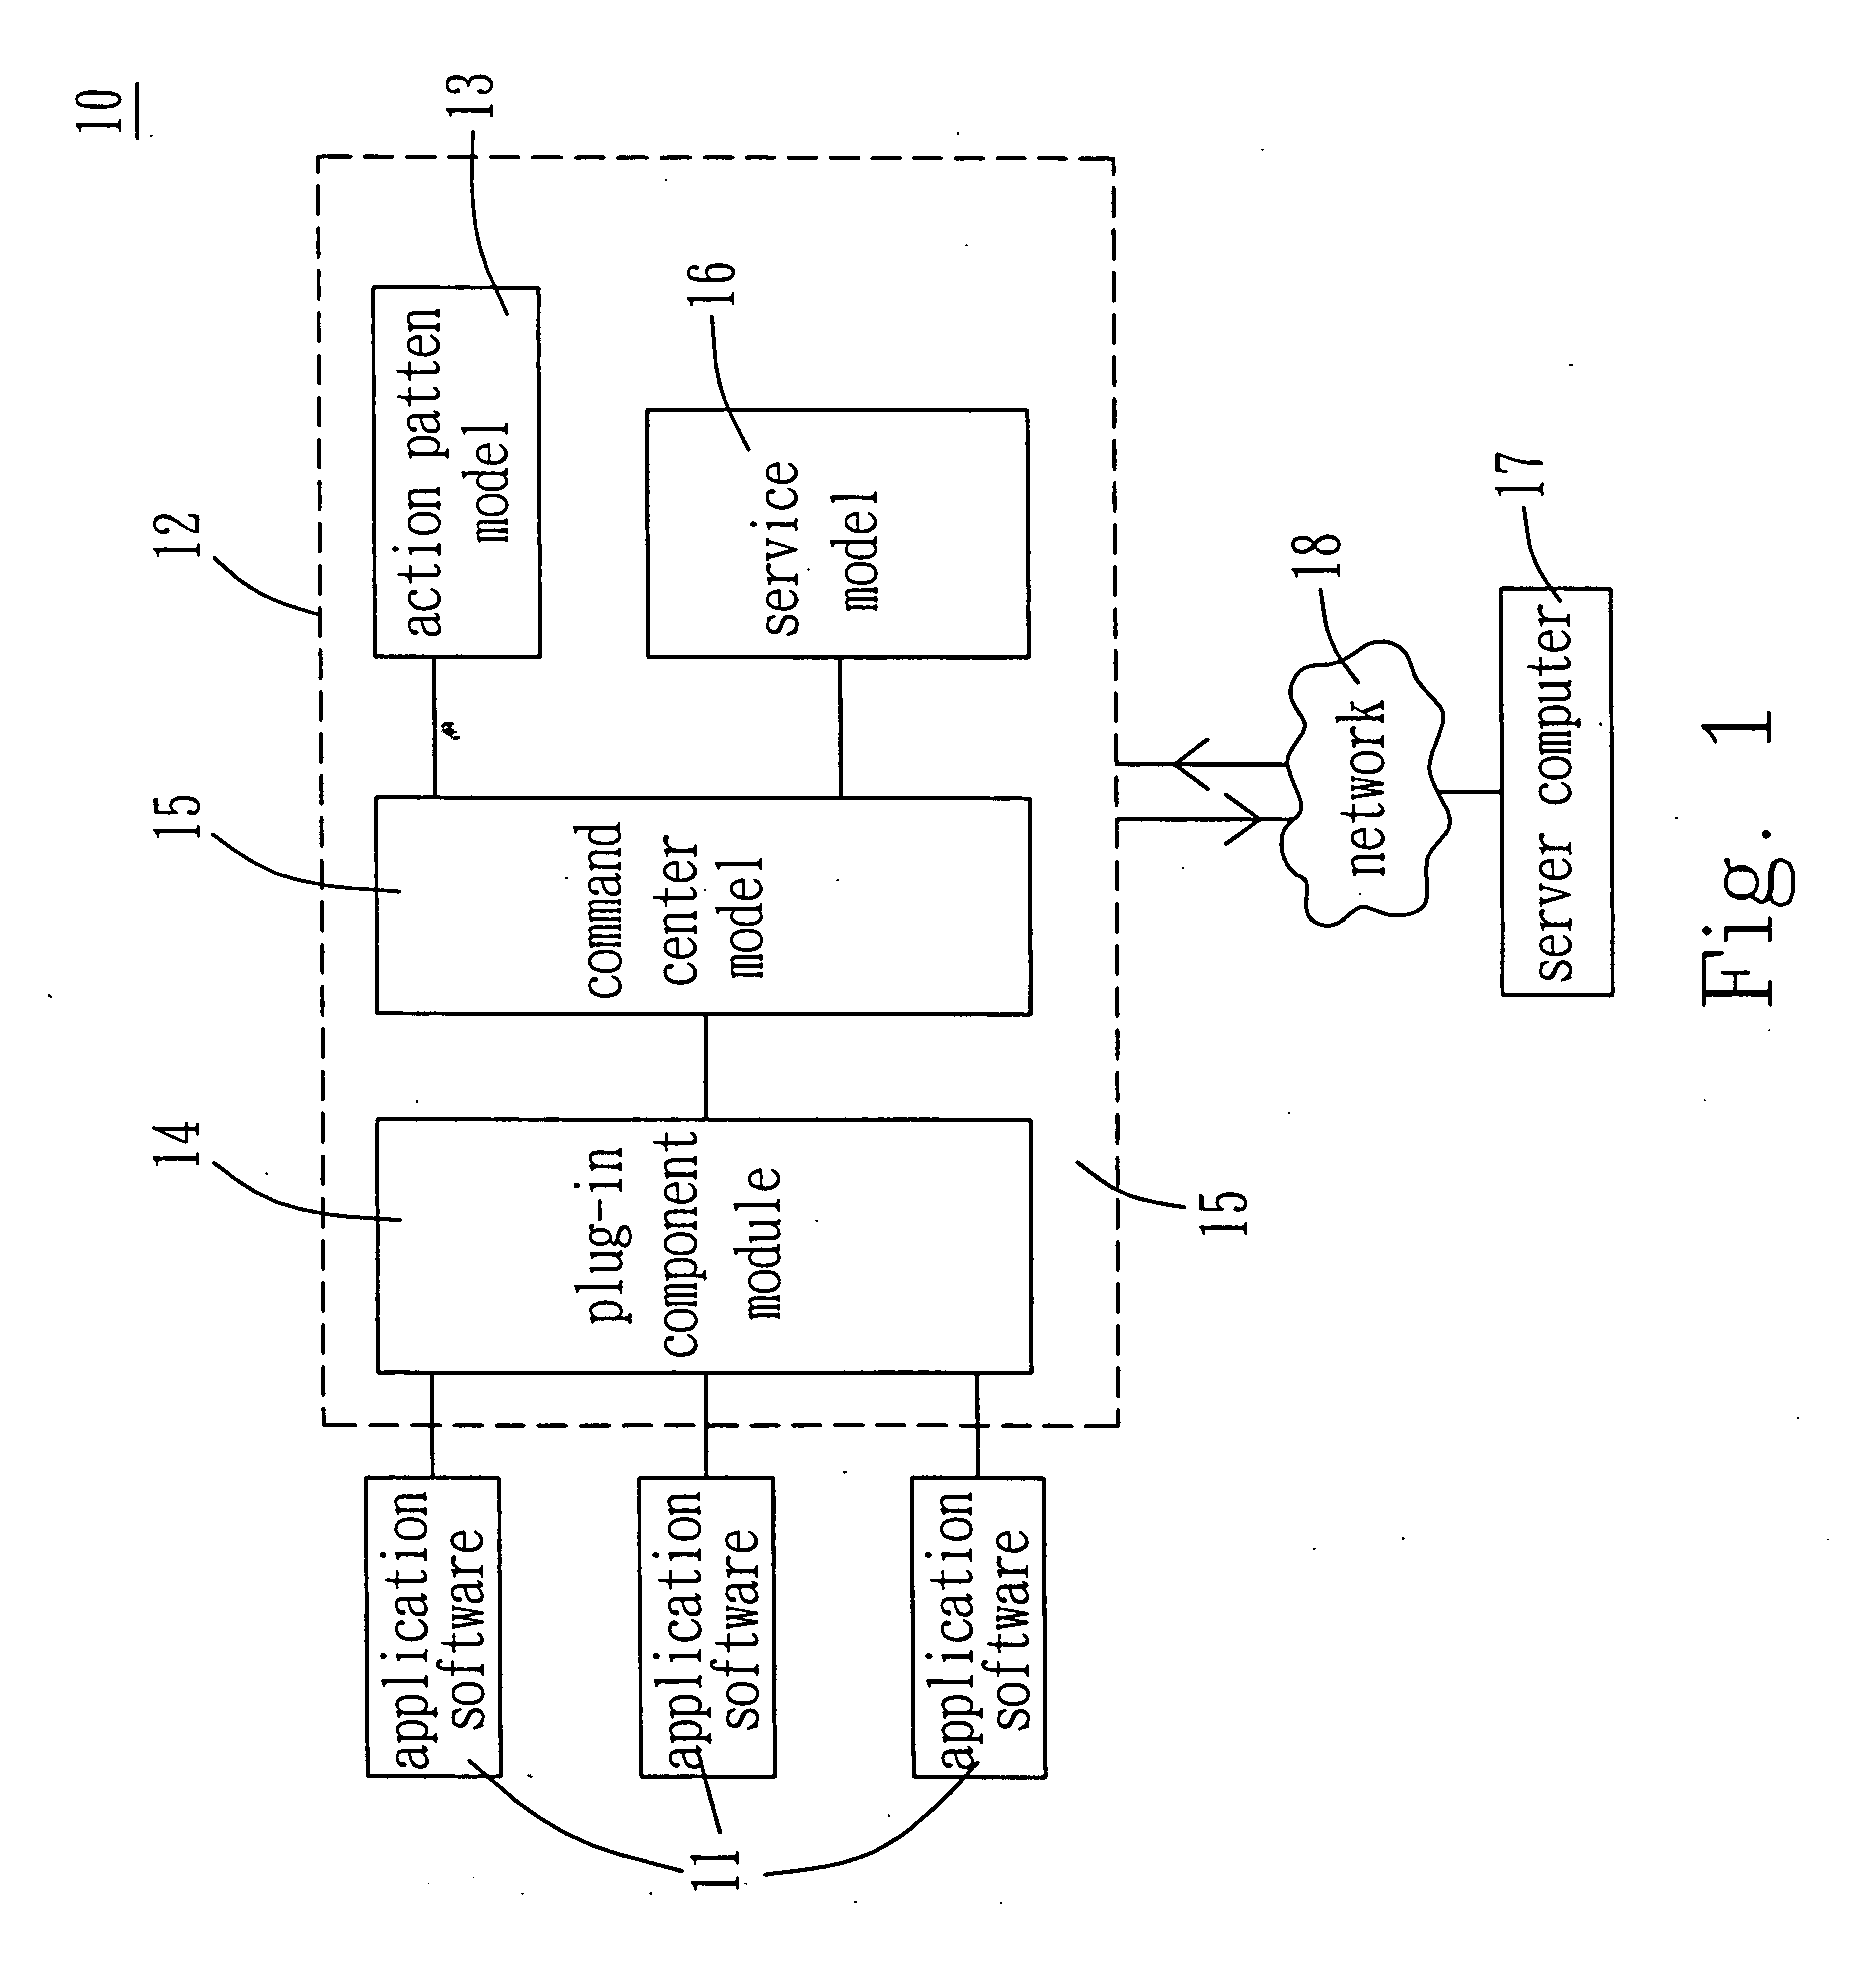 Operating environment system and method for executing workflow on computer